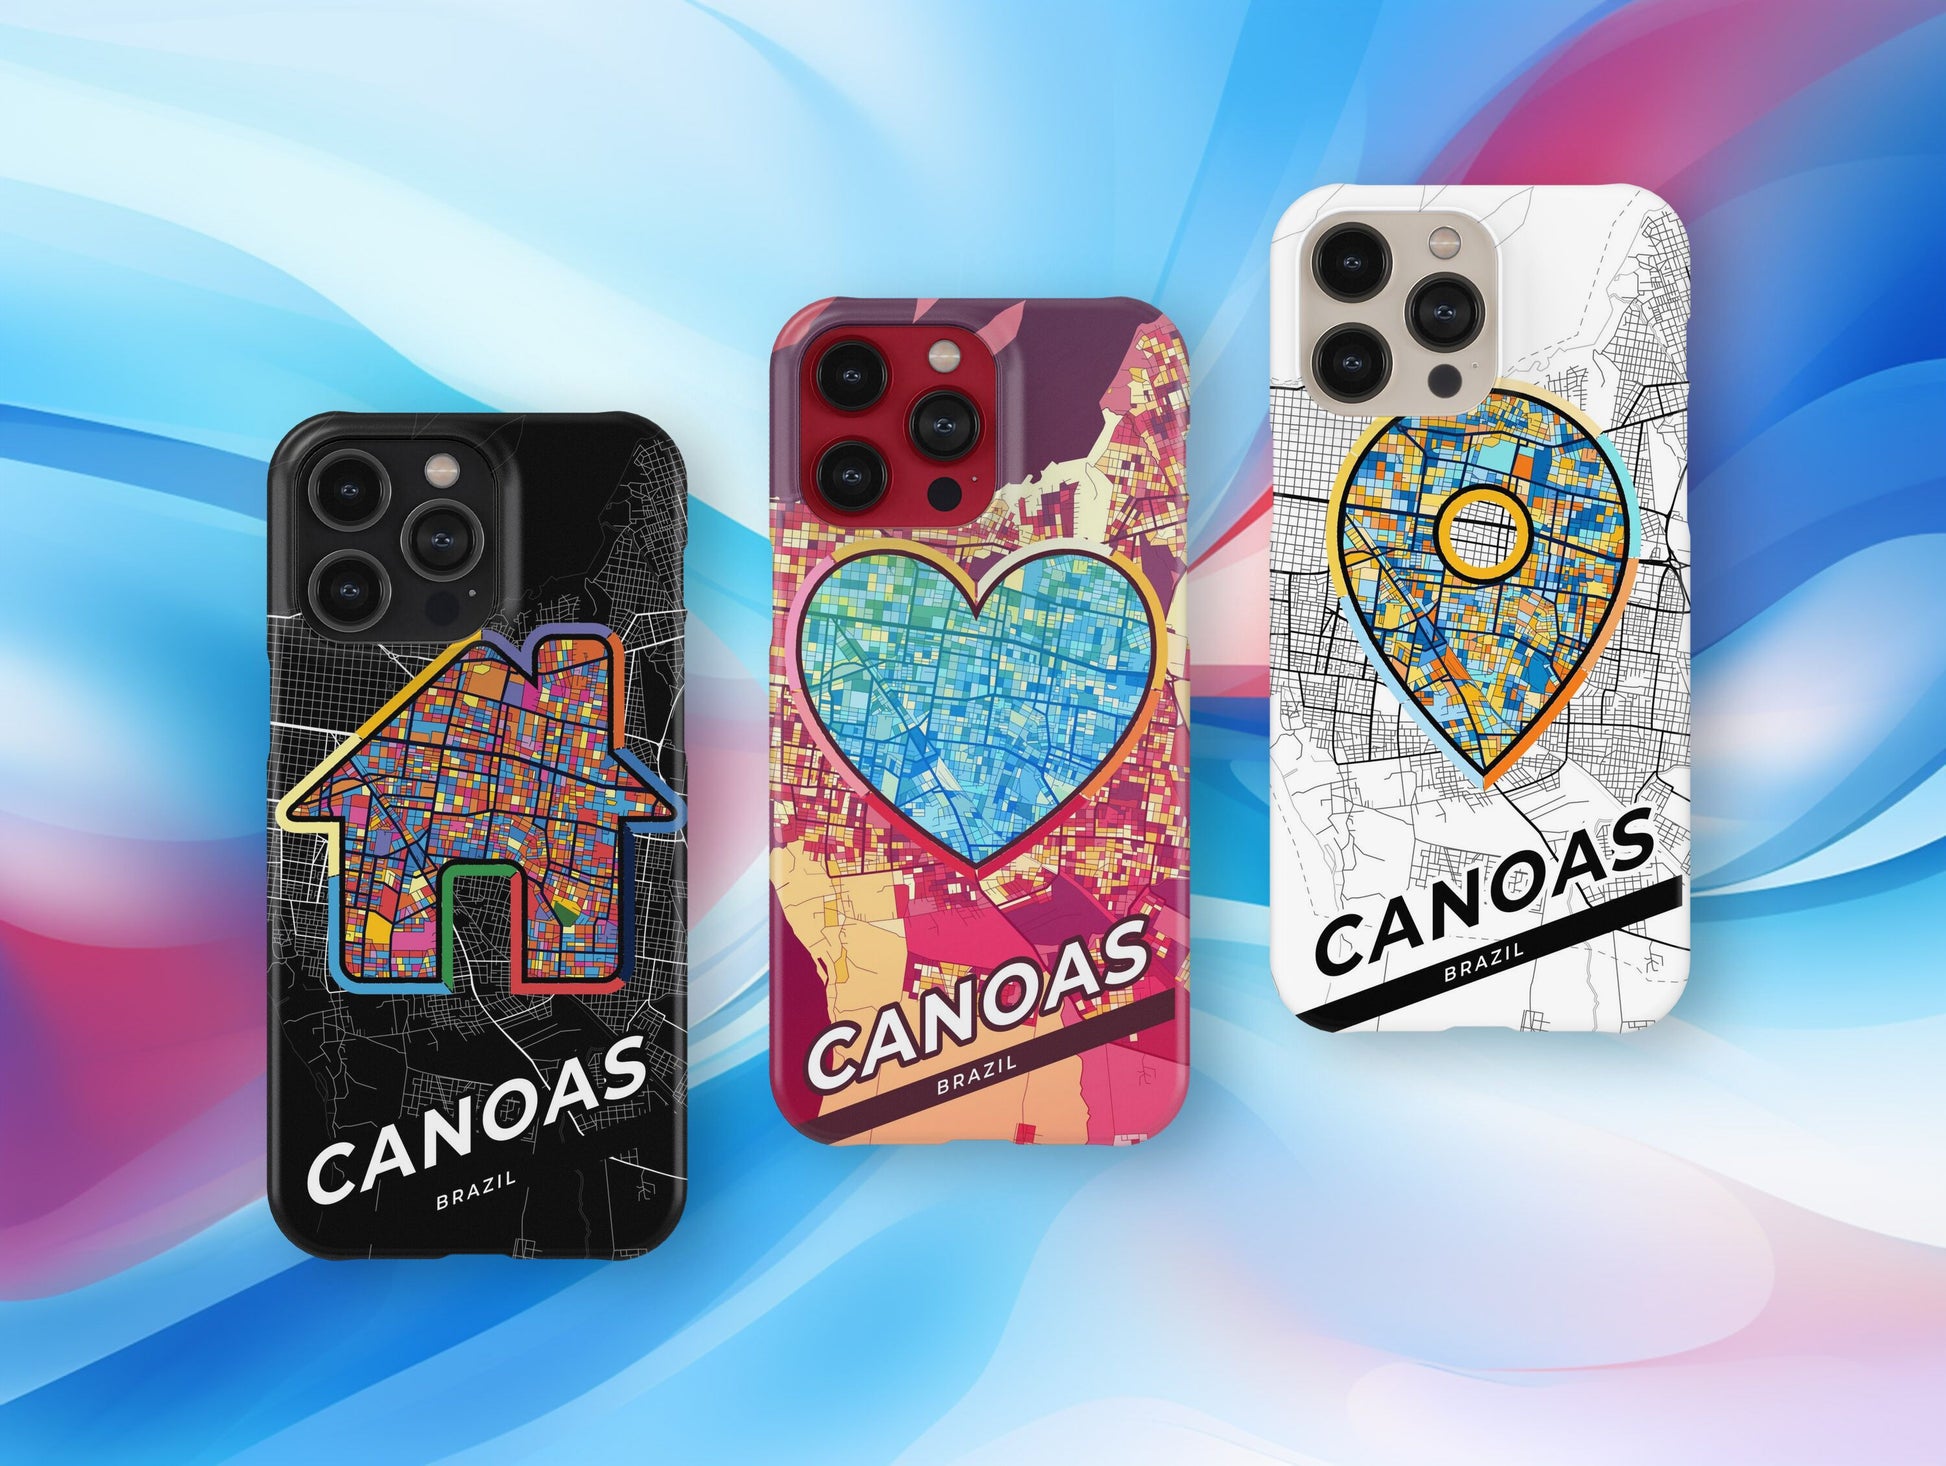 Canoas Brazil slim phone case with colorful icon. Birthday, wedding or housewarming gift. Couple match cases.